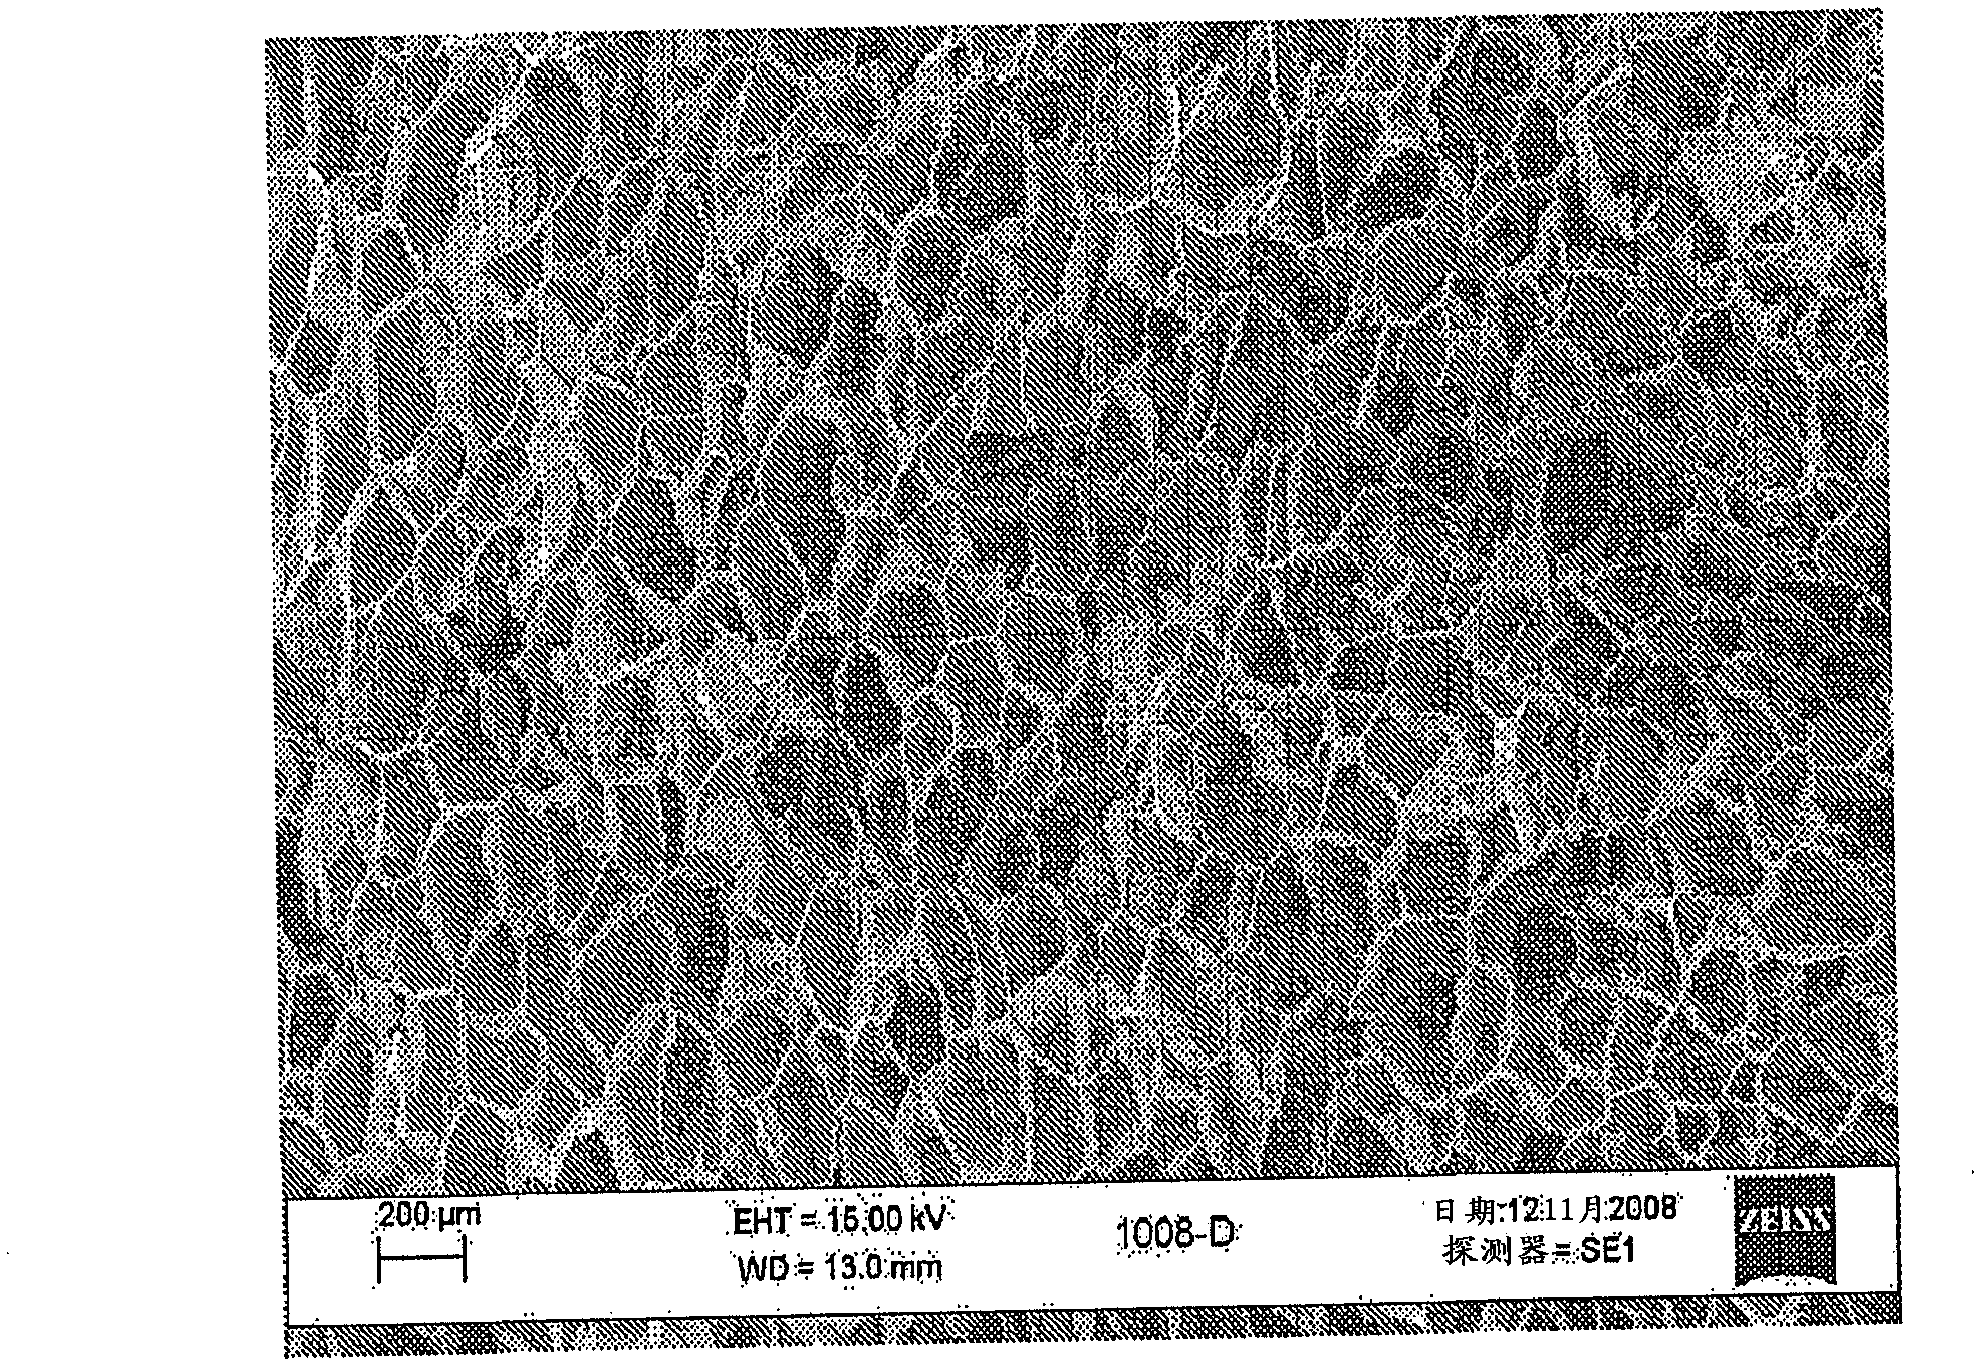 Porous carbon-containing compounds as water carriers and cell size controlling agents for polymeric foams